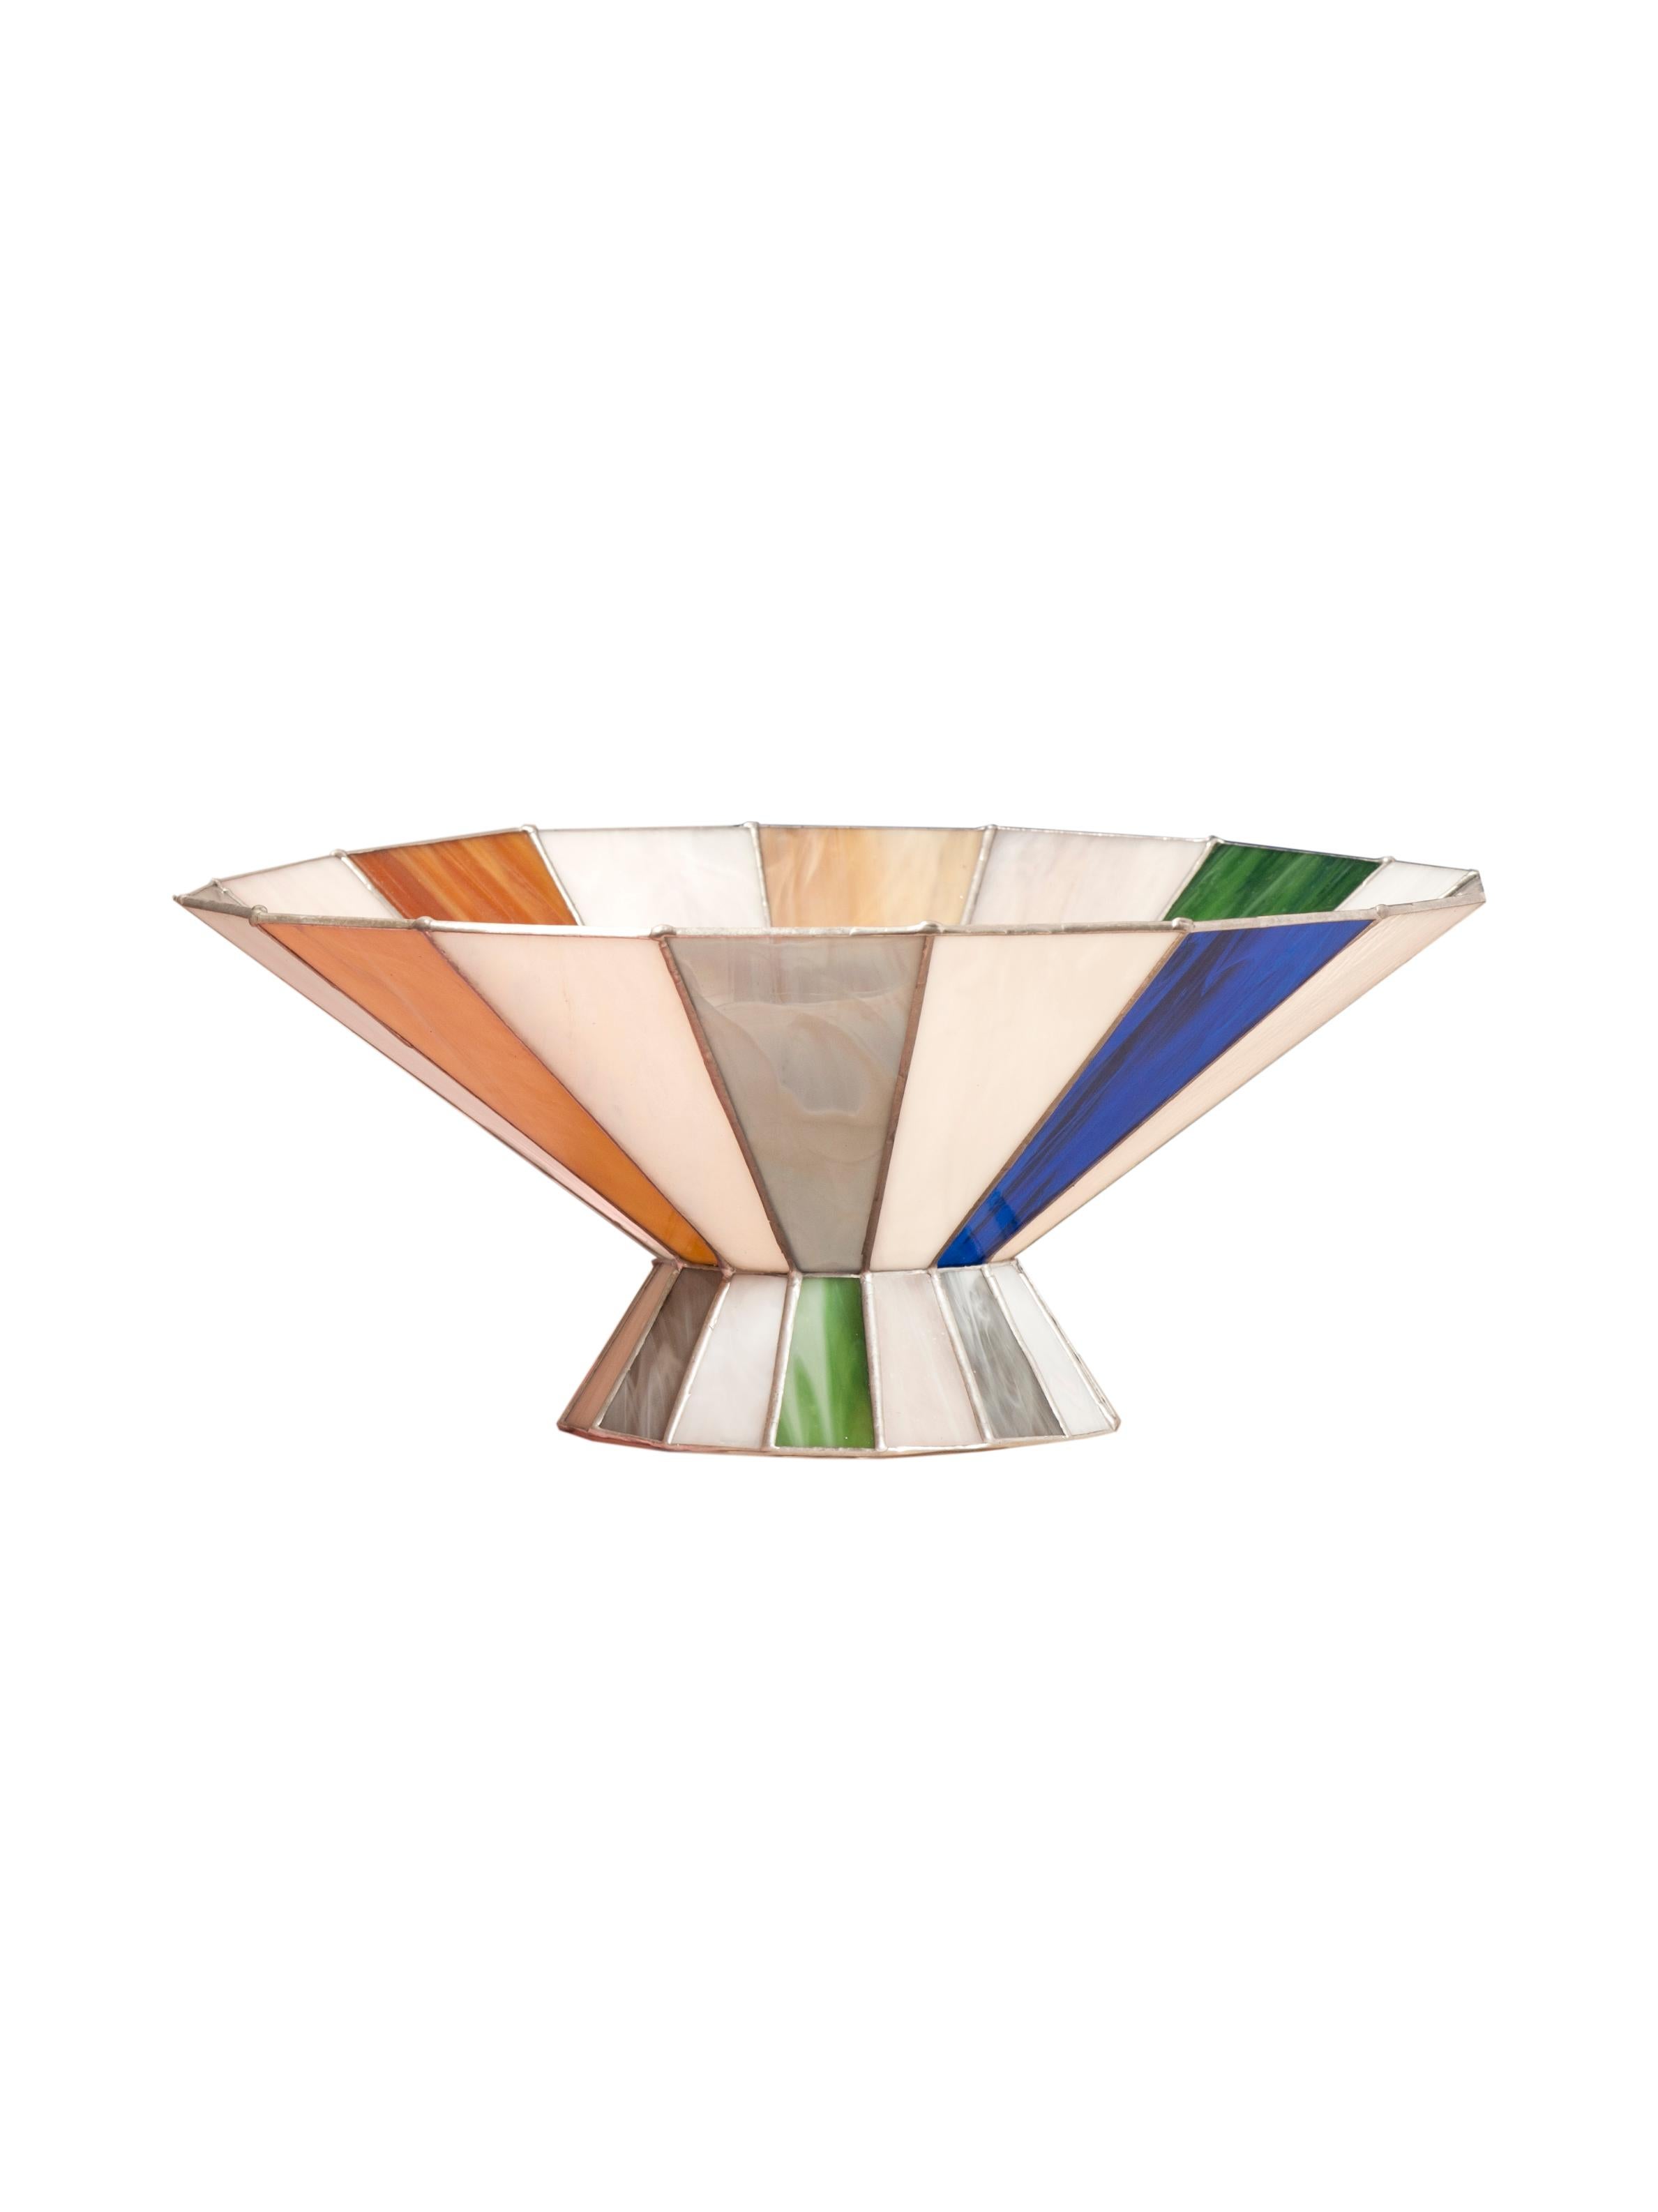 Caleido bowl by Serena Confalonieri
Dimensions: D 36 cm x H 15 cm
Materials: Handmade stained glass
Glass colors: White, blue, pale pink, forest green, grey, brown

Handmade stained glass bowl.

Serena Confalonieri (1980) is an independent